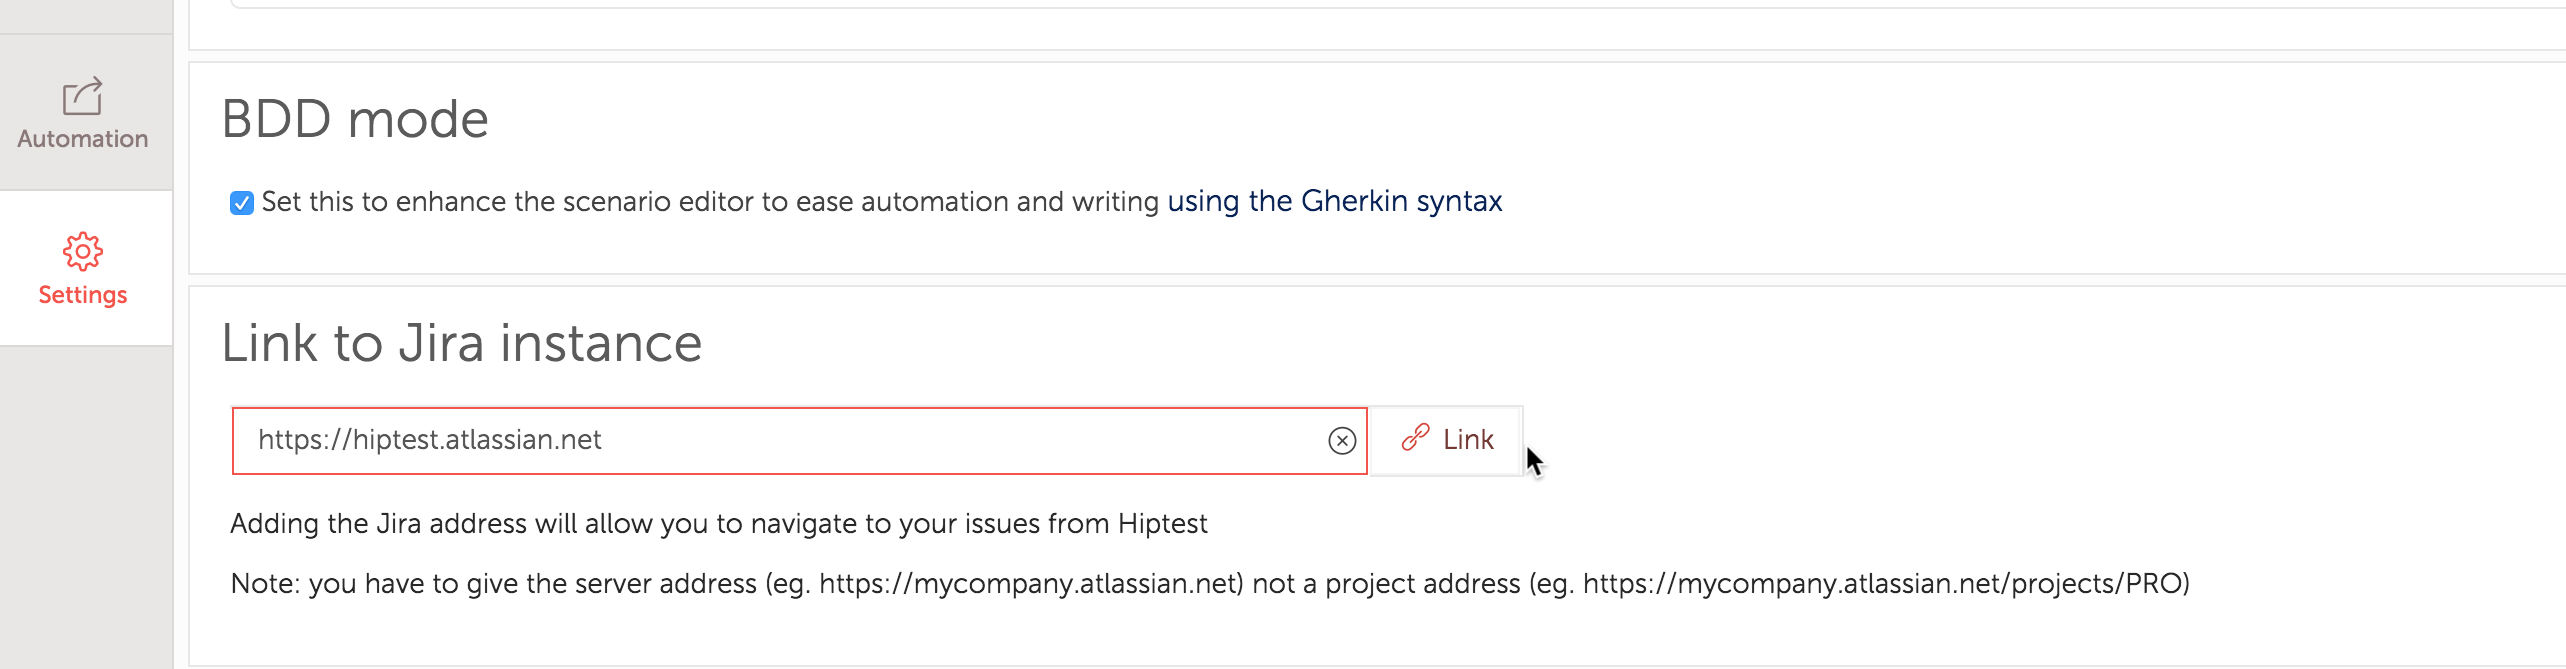 Add Jira address to link it with Hiptest